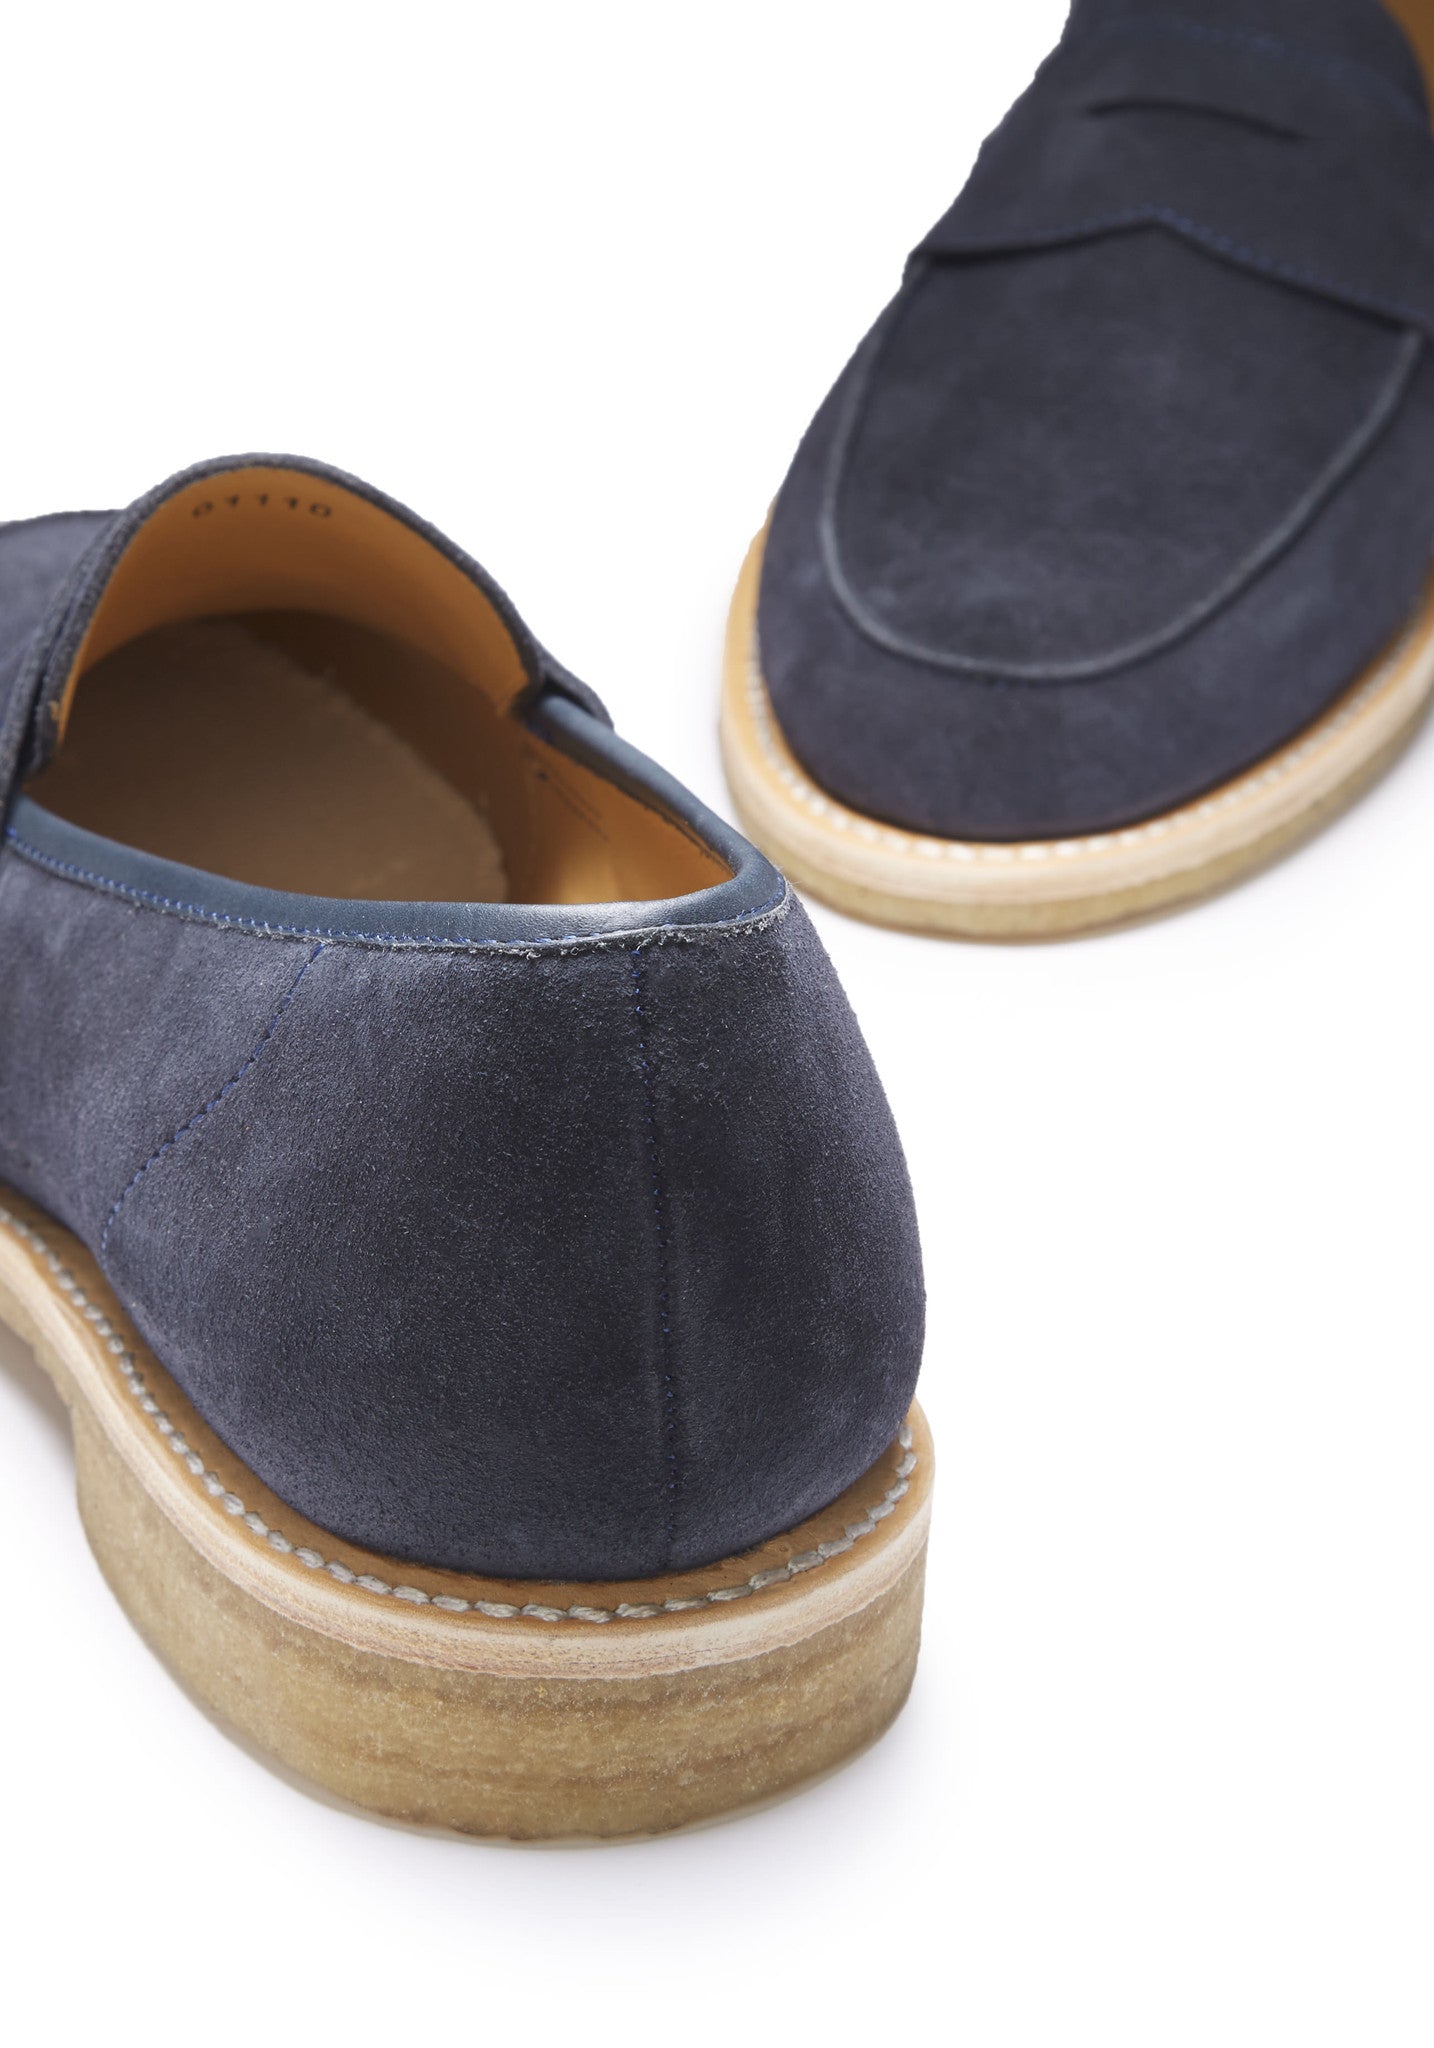 Blue Suede Loafers, Crepe Rubber Welted Sole - Hugs & Co.